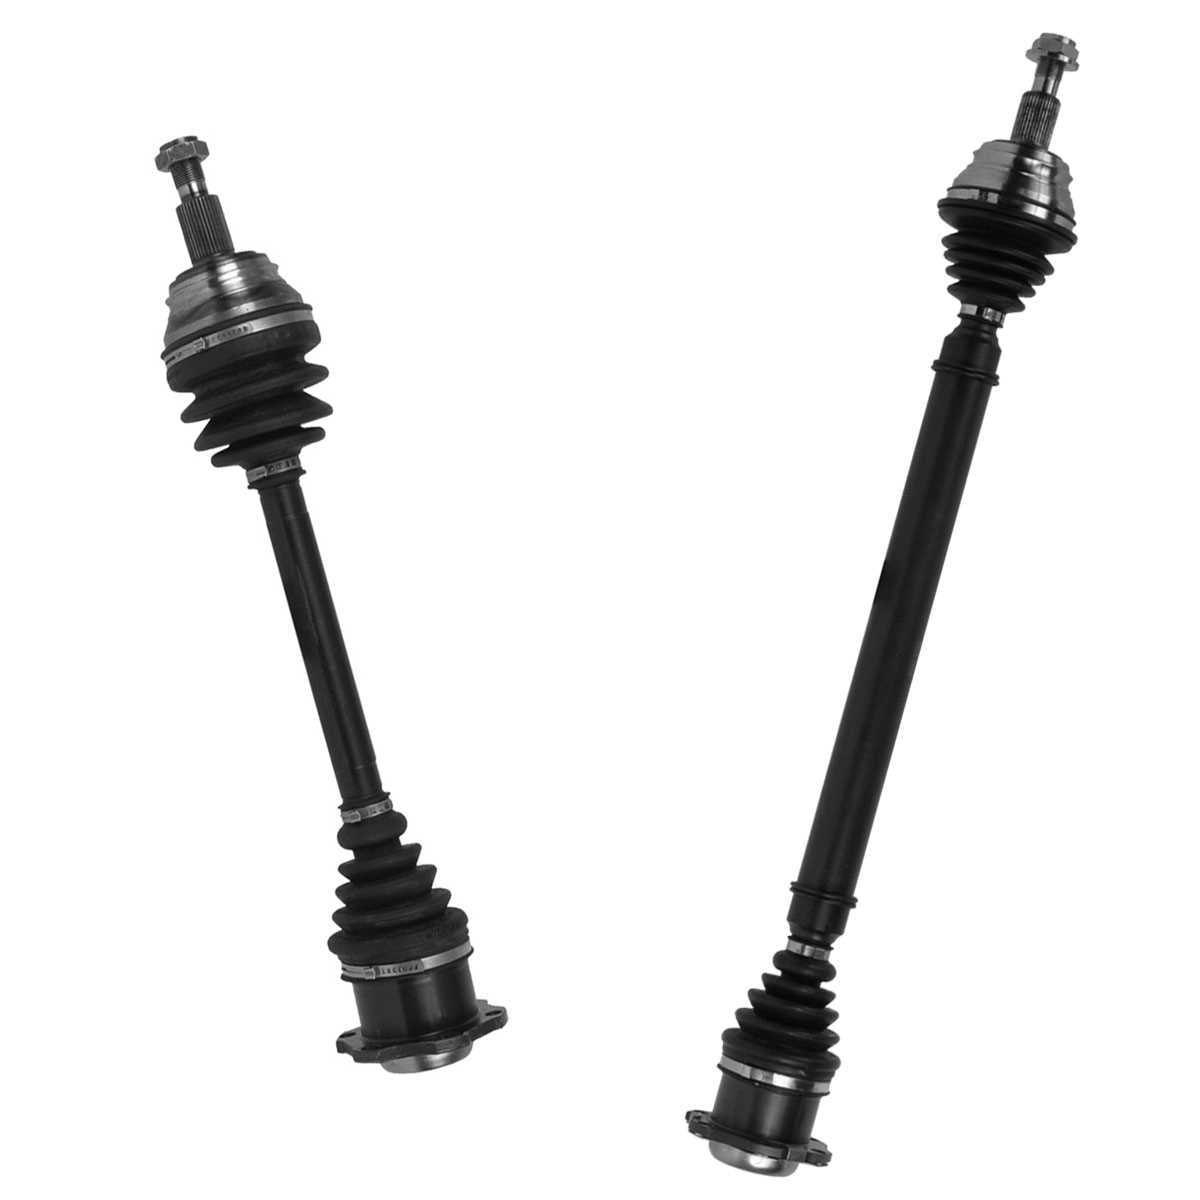 Bodeman NEW Pair 2 Front CV Axle Shaft Driver and Passenger Side fits Manual Transmission Only 2001 Kia Sephia 2001 2002 2003 2004 Kia Spectra 1.8L 